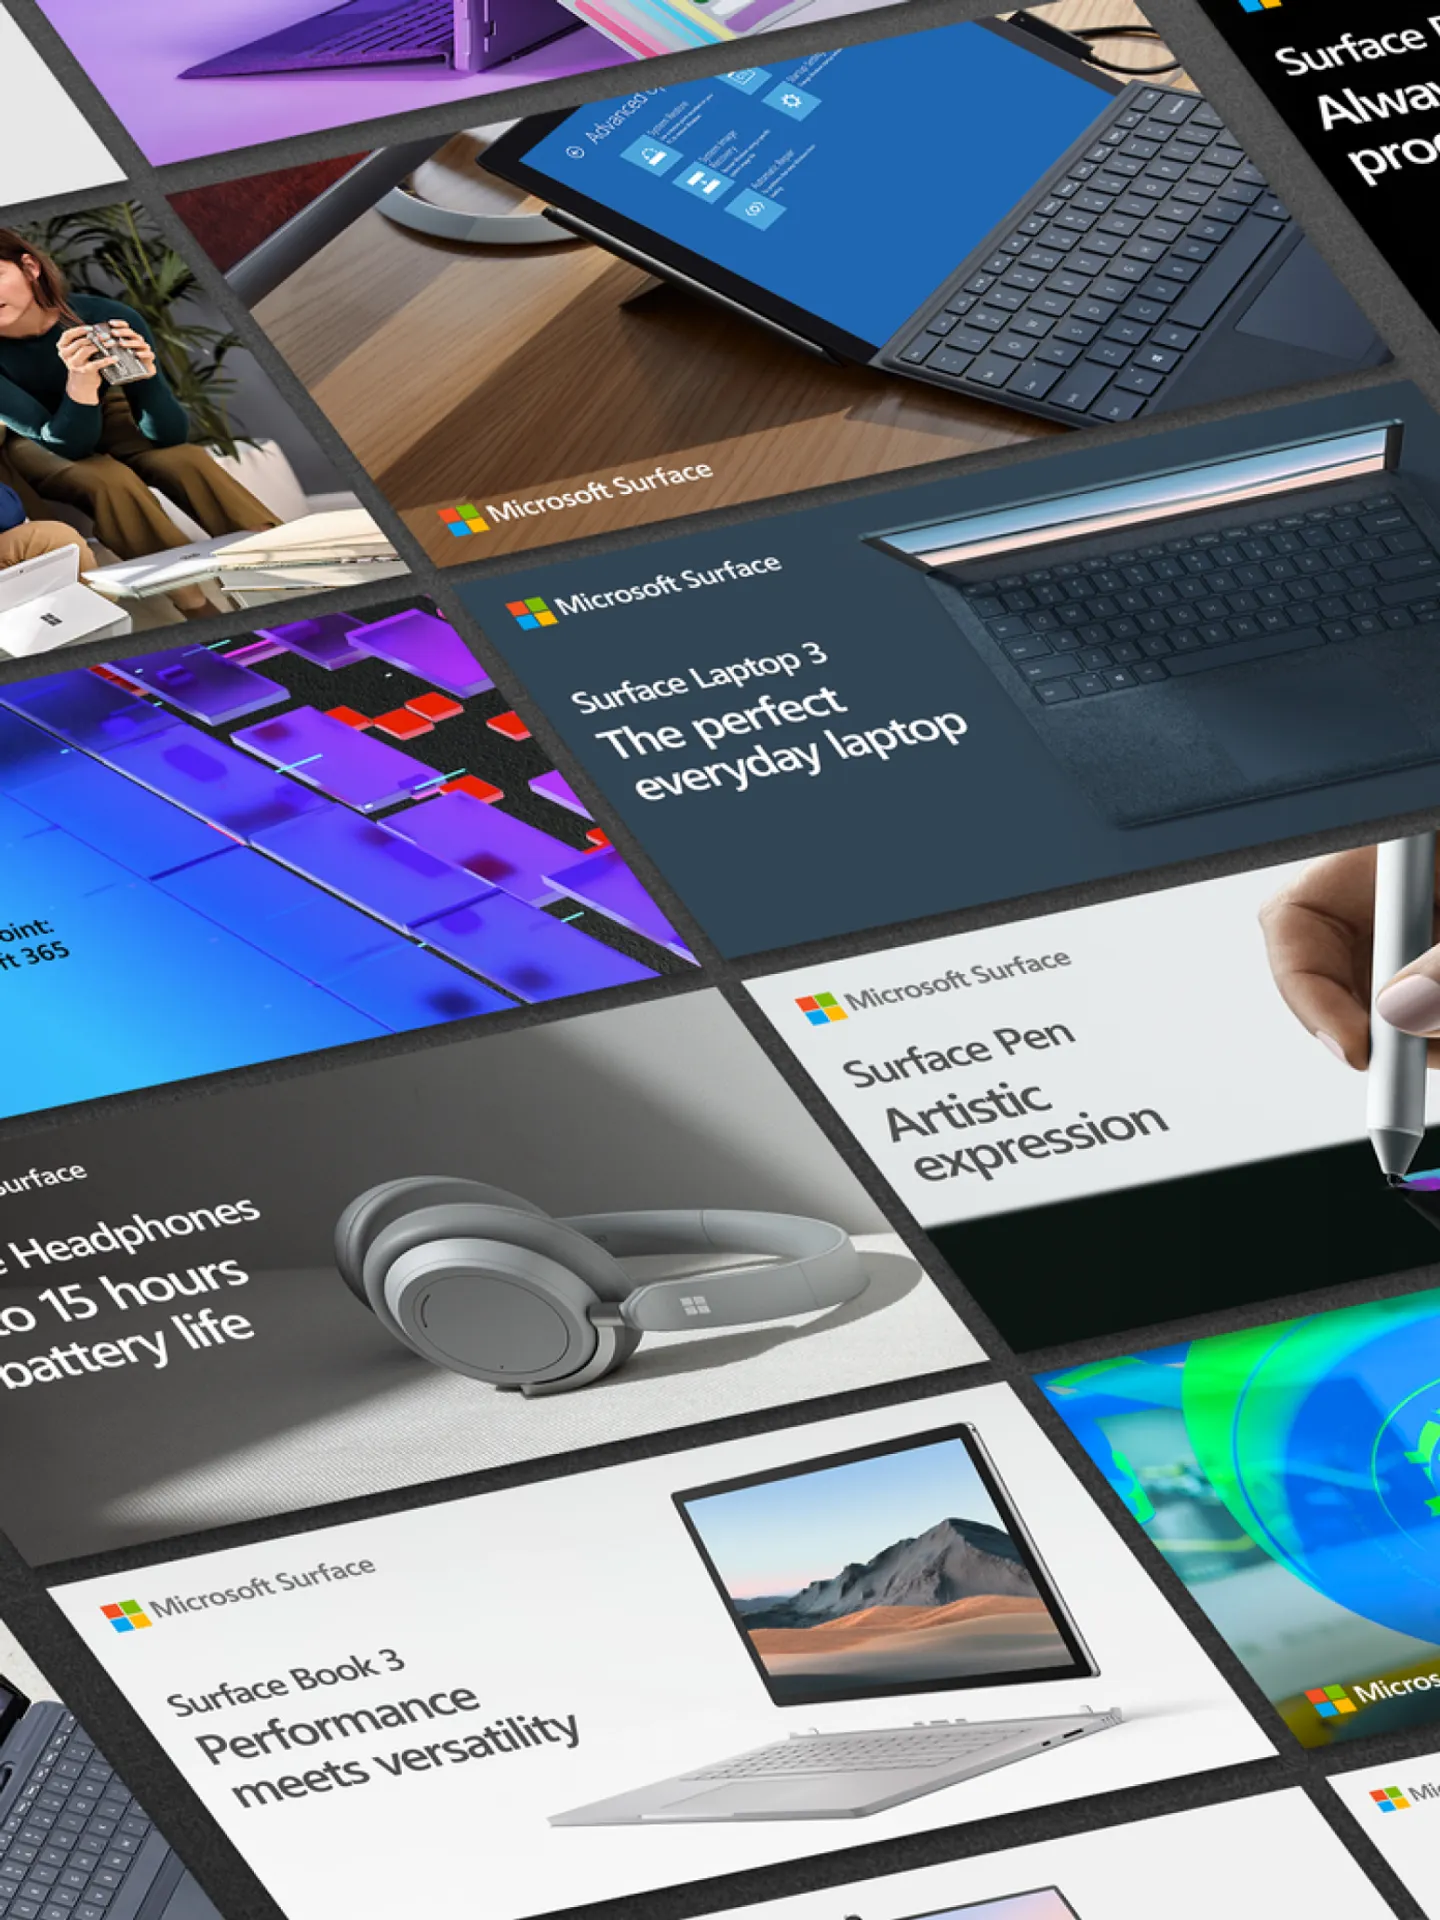 Composite image of campaign work done for Microsoft Surface